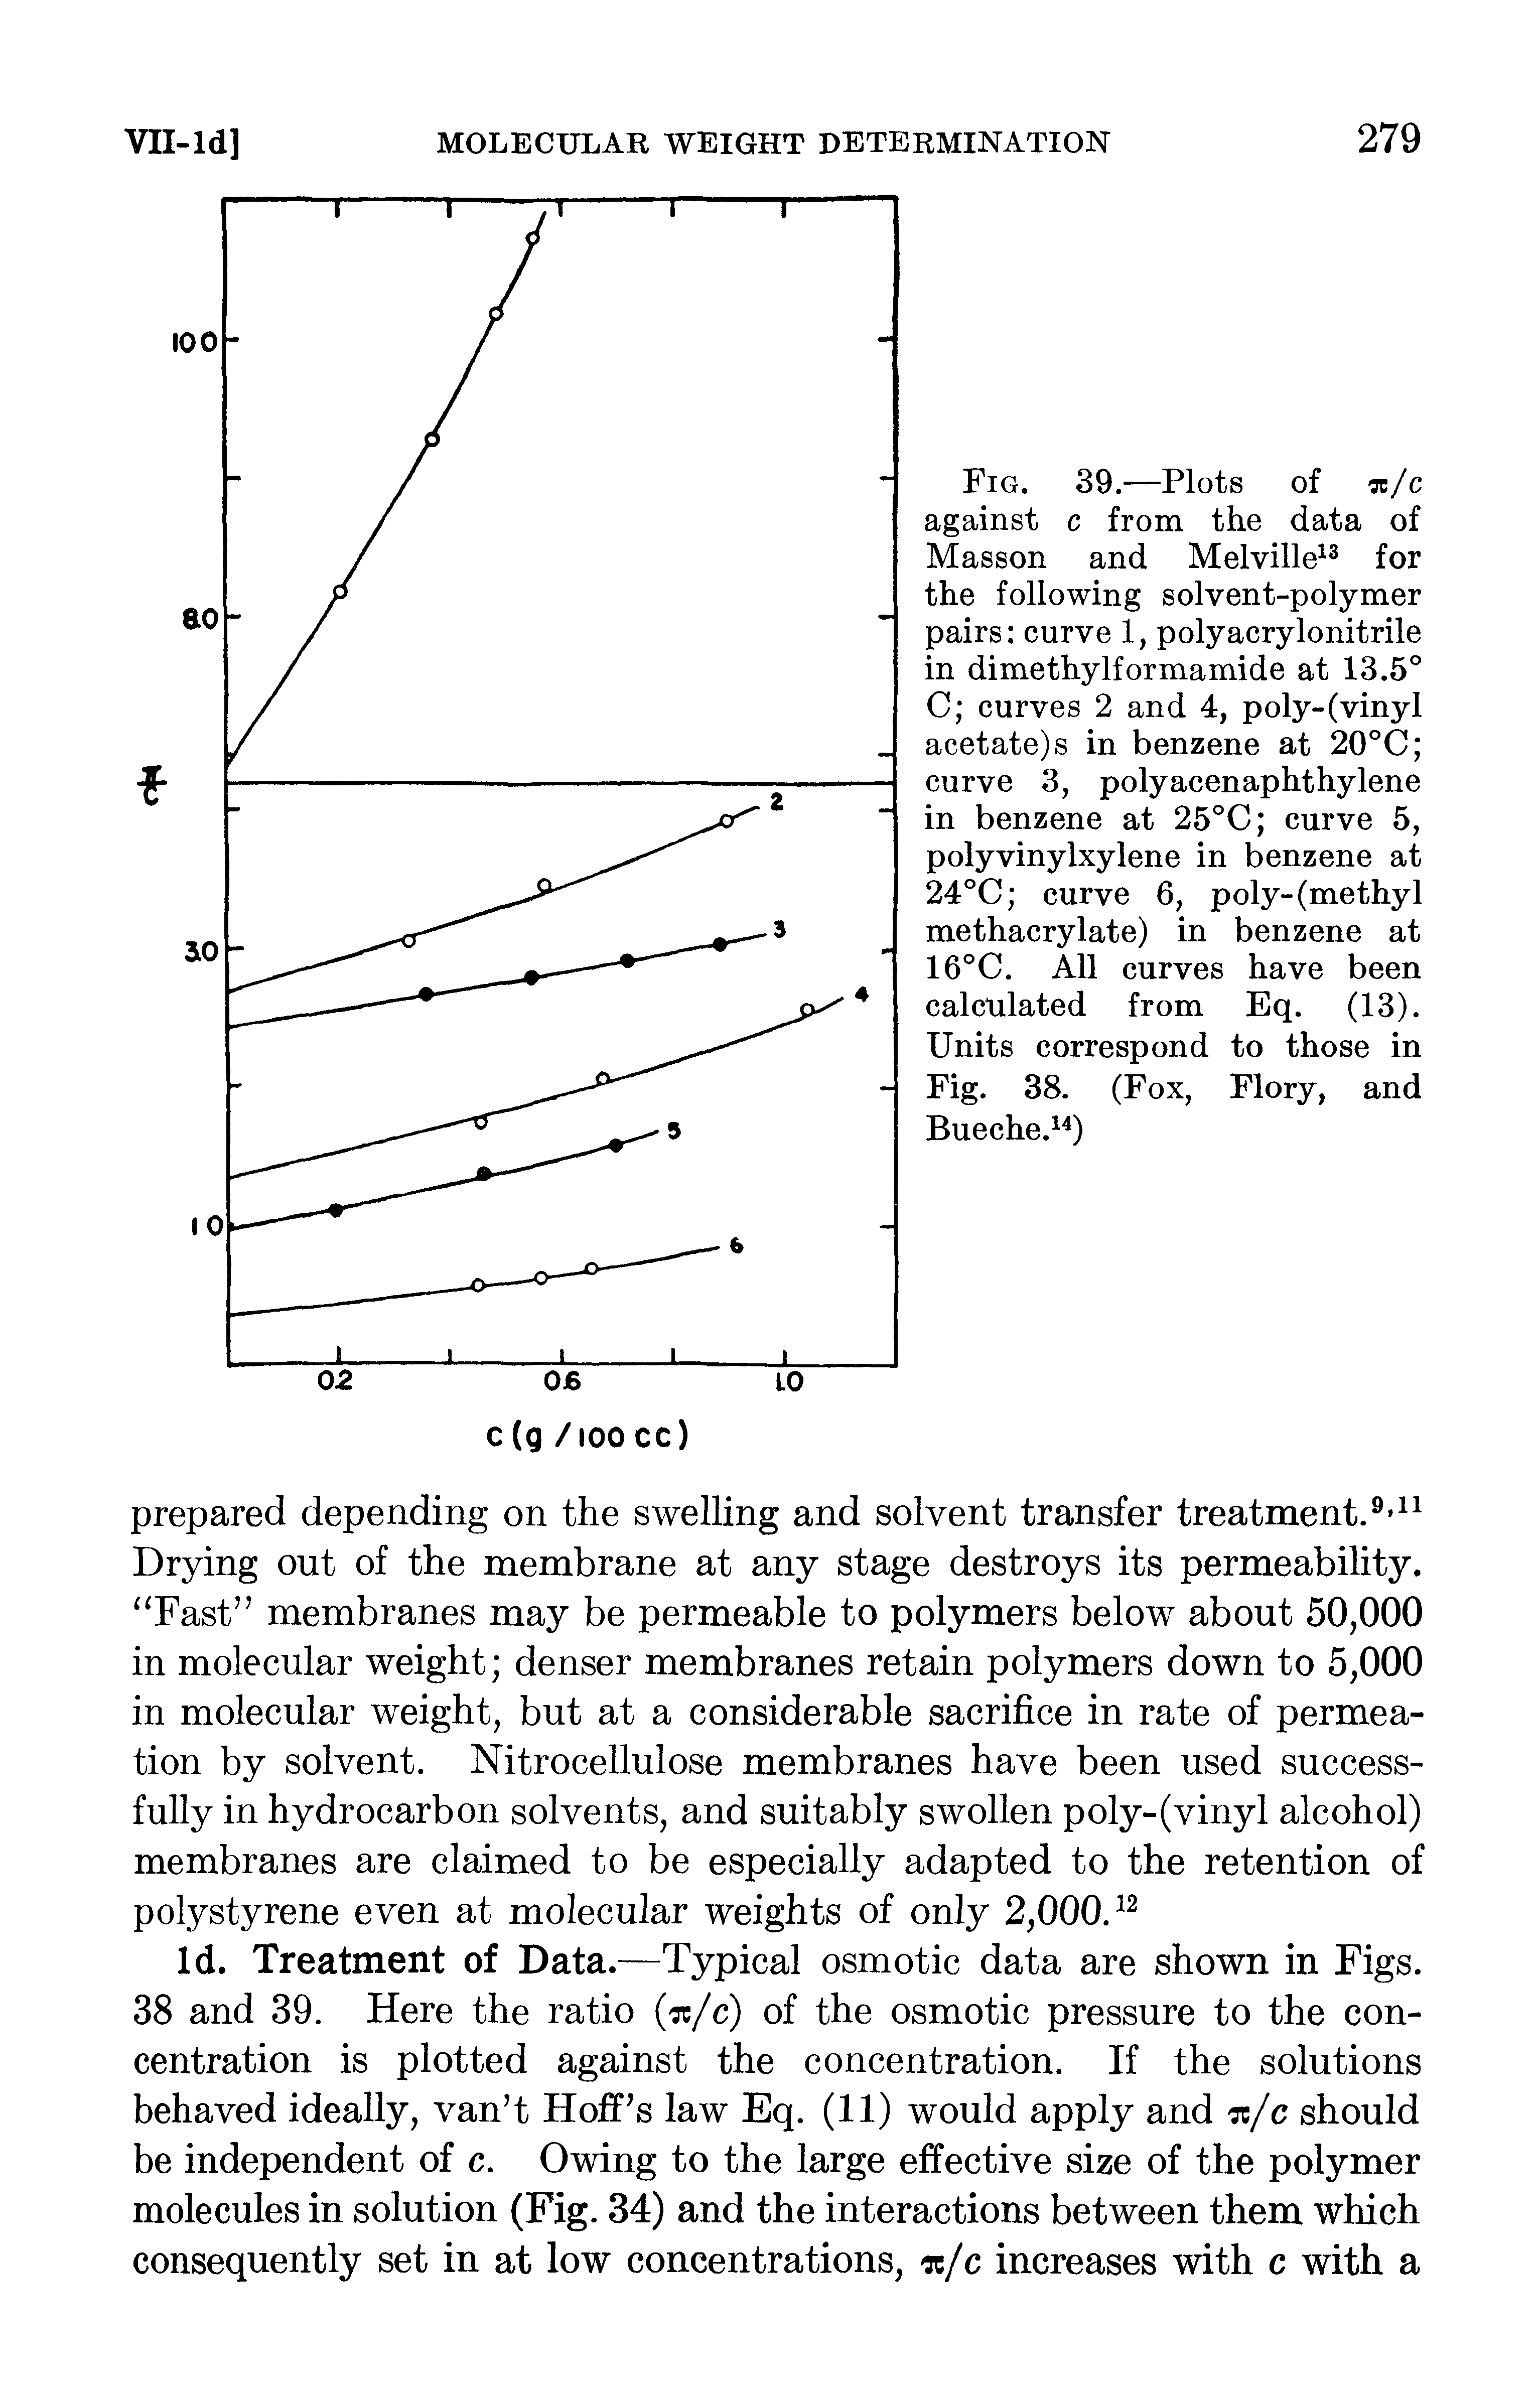 Fig. 39.—Plots of c/c against c from the data of Masson and Melville for the following solvent-polymer pairs curve 1, polyacrylonitrile in dimethylformamide at 13.5° C curves 2 and 4, poly-(vinyl acetate) s in benzene at 20°C curve 3, polyacenaphthylene in benzene at 25°C curve 5, polyvinylxylene in benzene at 24°C curve 6, poly-(methyl methacrylate) in benzene at 16°C. All curves have been calculated from Eq. (13). Units correspond to those in Fig. 38. (Fox, Flory, and Bueche. )...